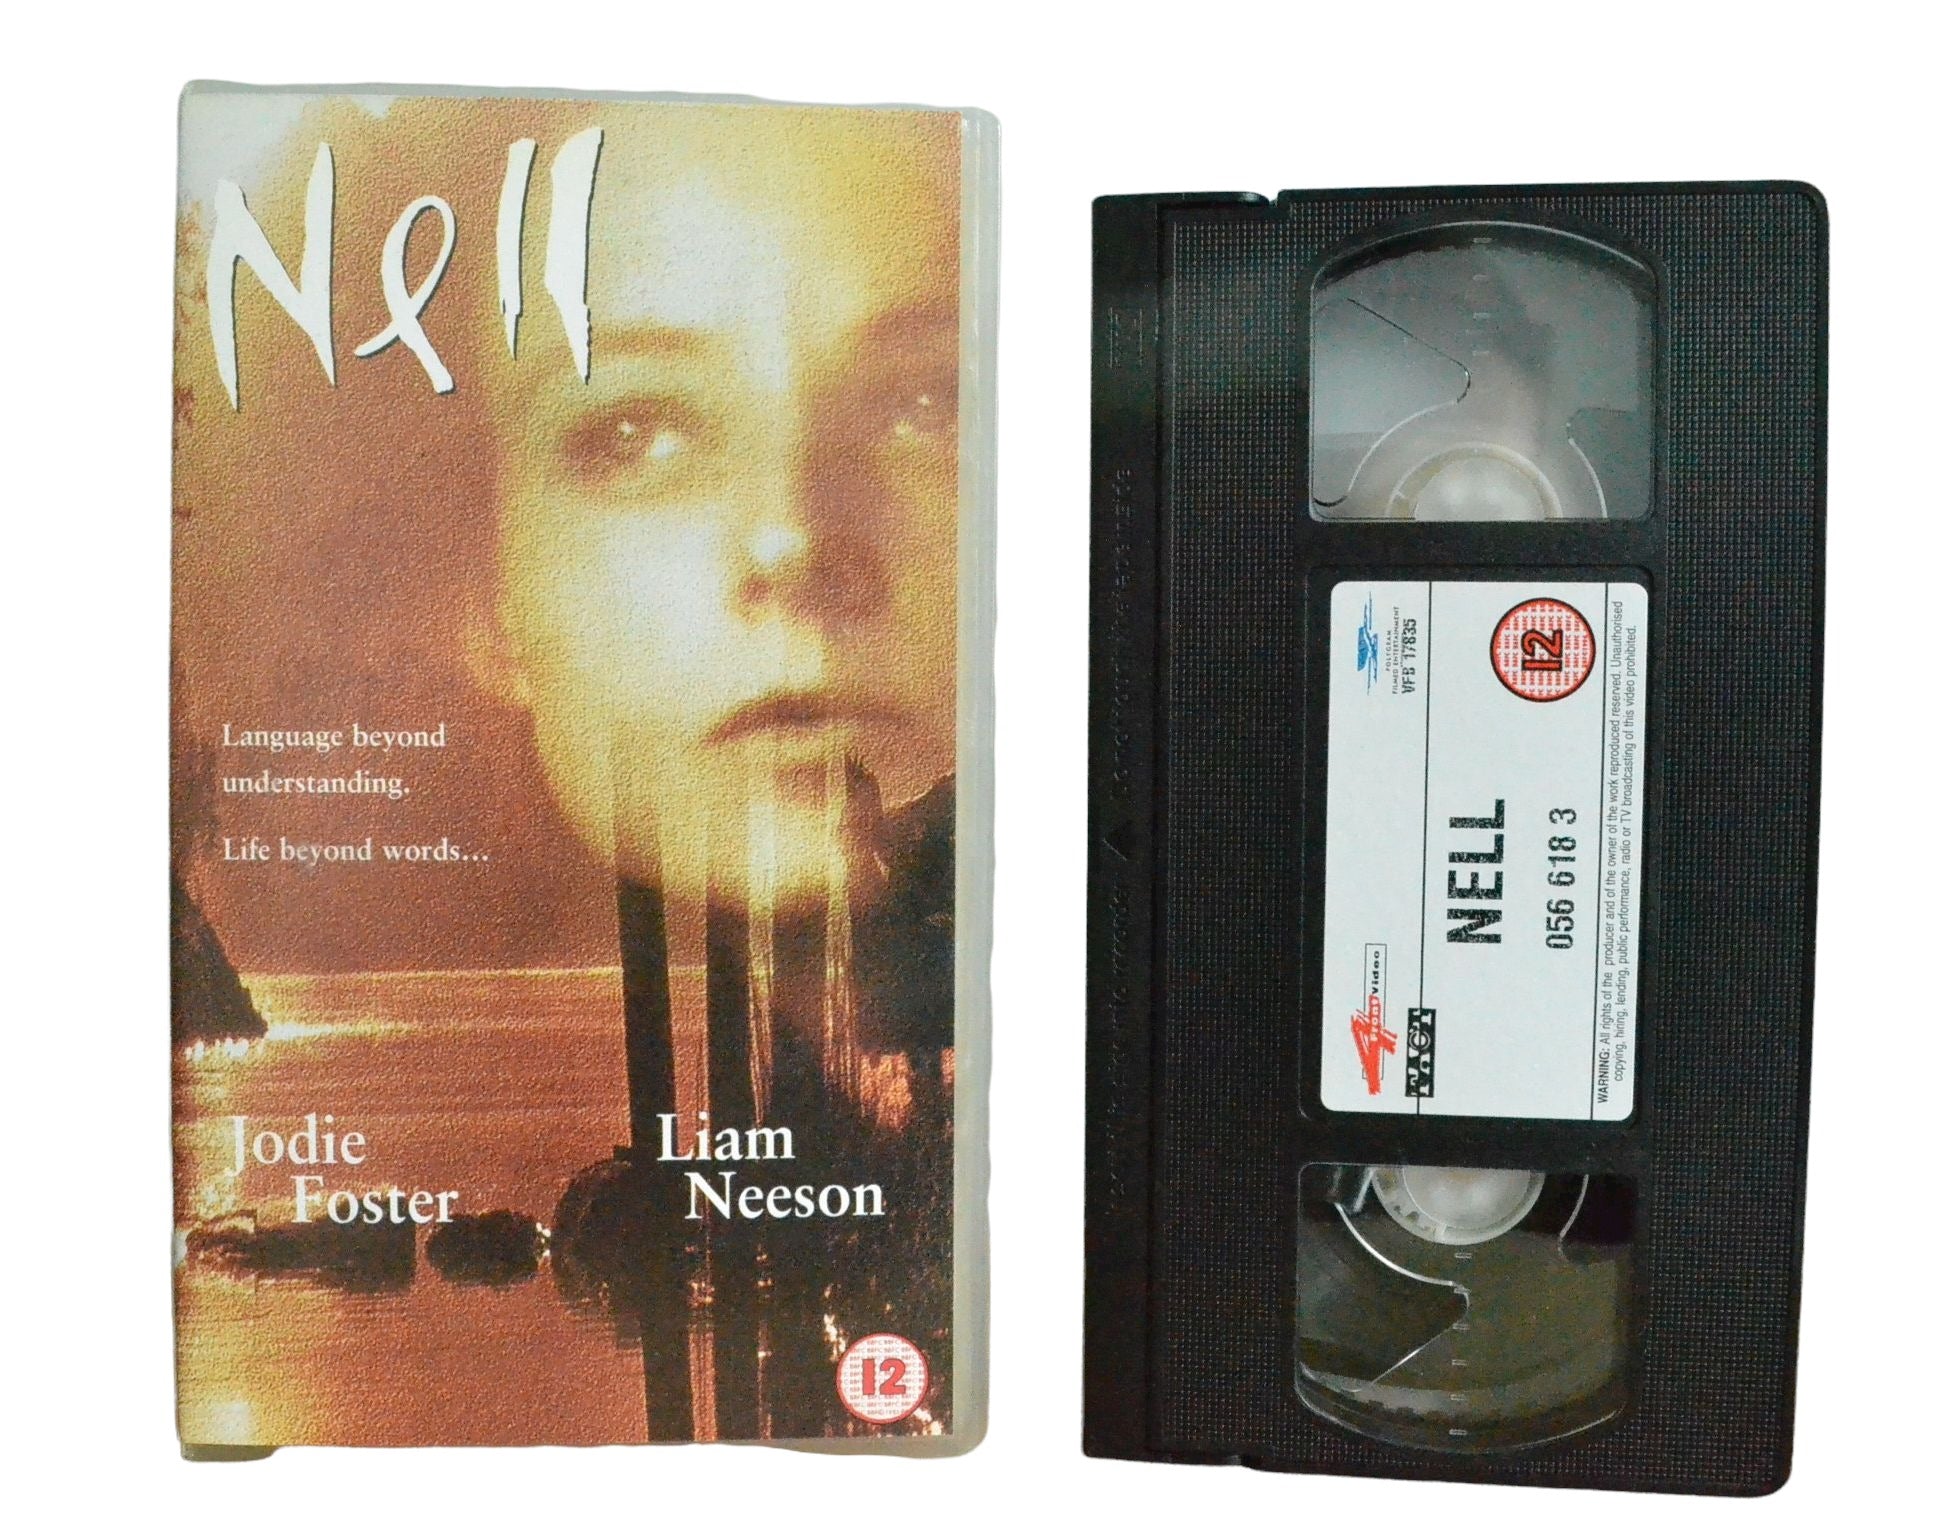 Nell - Language Beyond Understanding, Life Beyond Words... - Jodie Foster - 4Front Video - Vintage - Pal VHS-